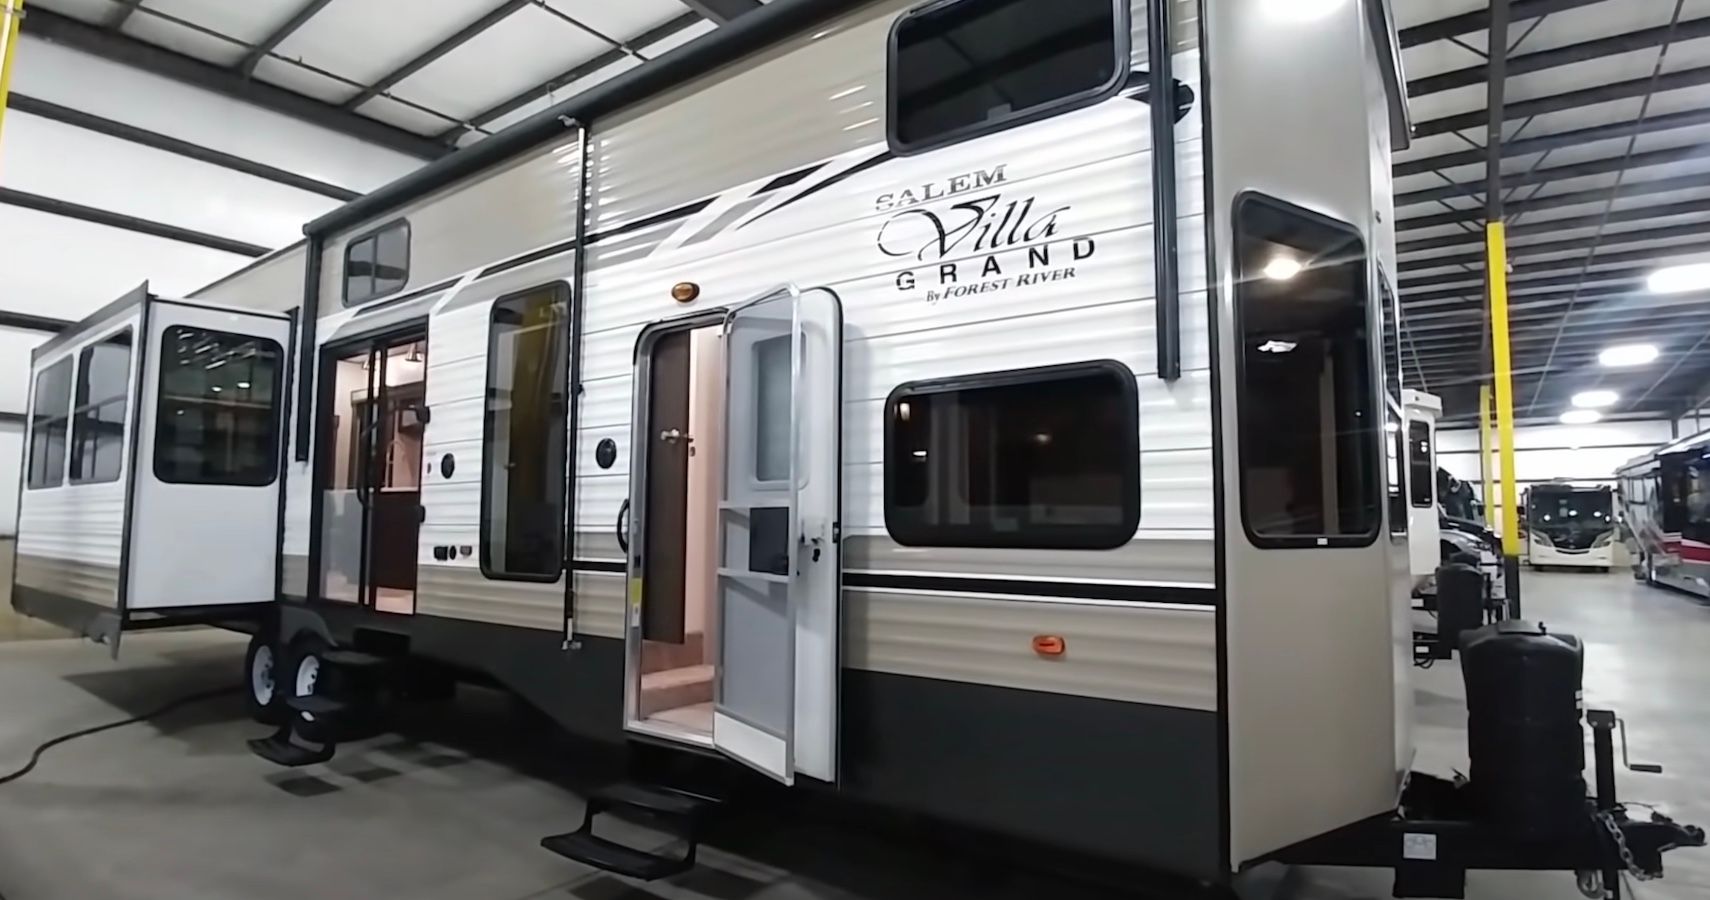 this-two-story-trailer-rv-looks-nicer-inside-than-most-apartments